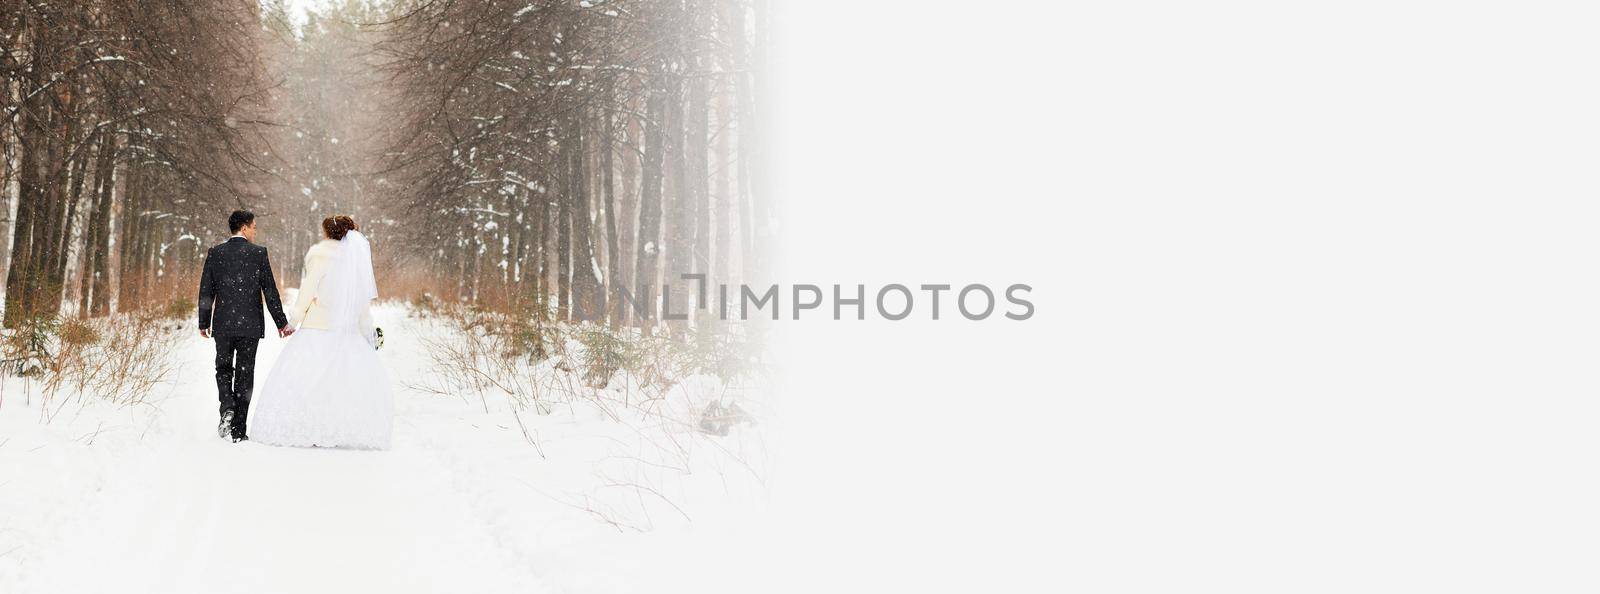 Banner bride and groom in winter snow woods - copy space and christmas wedding holidays concept by Satura86